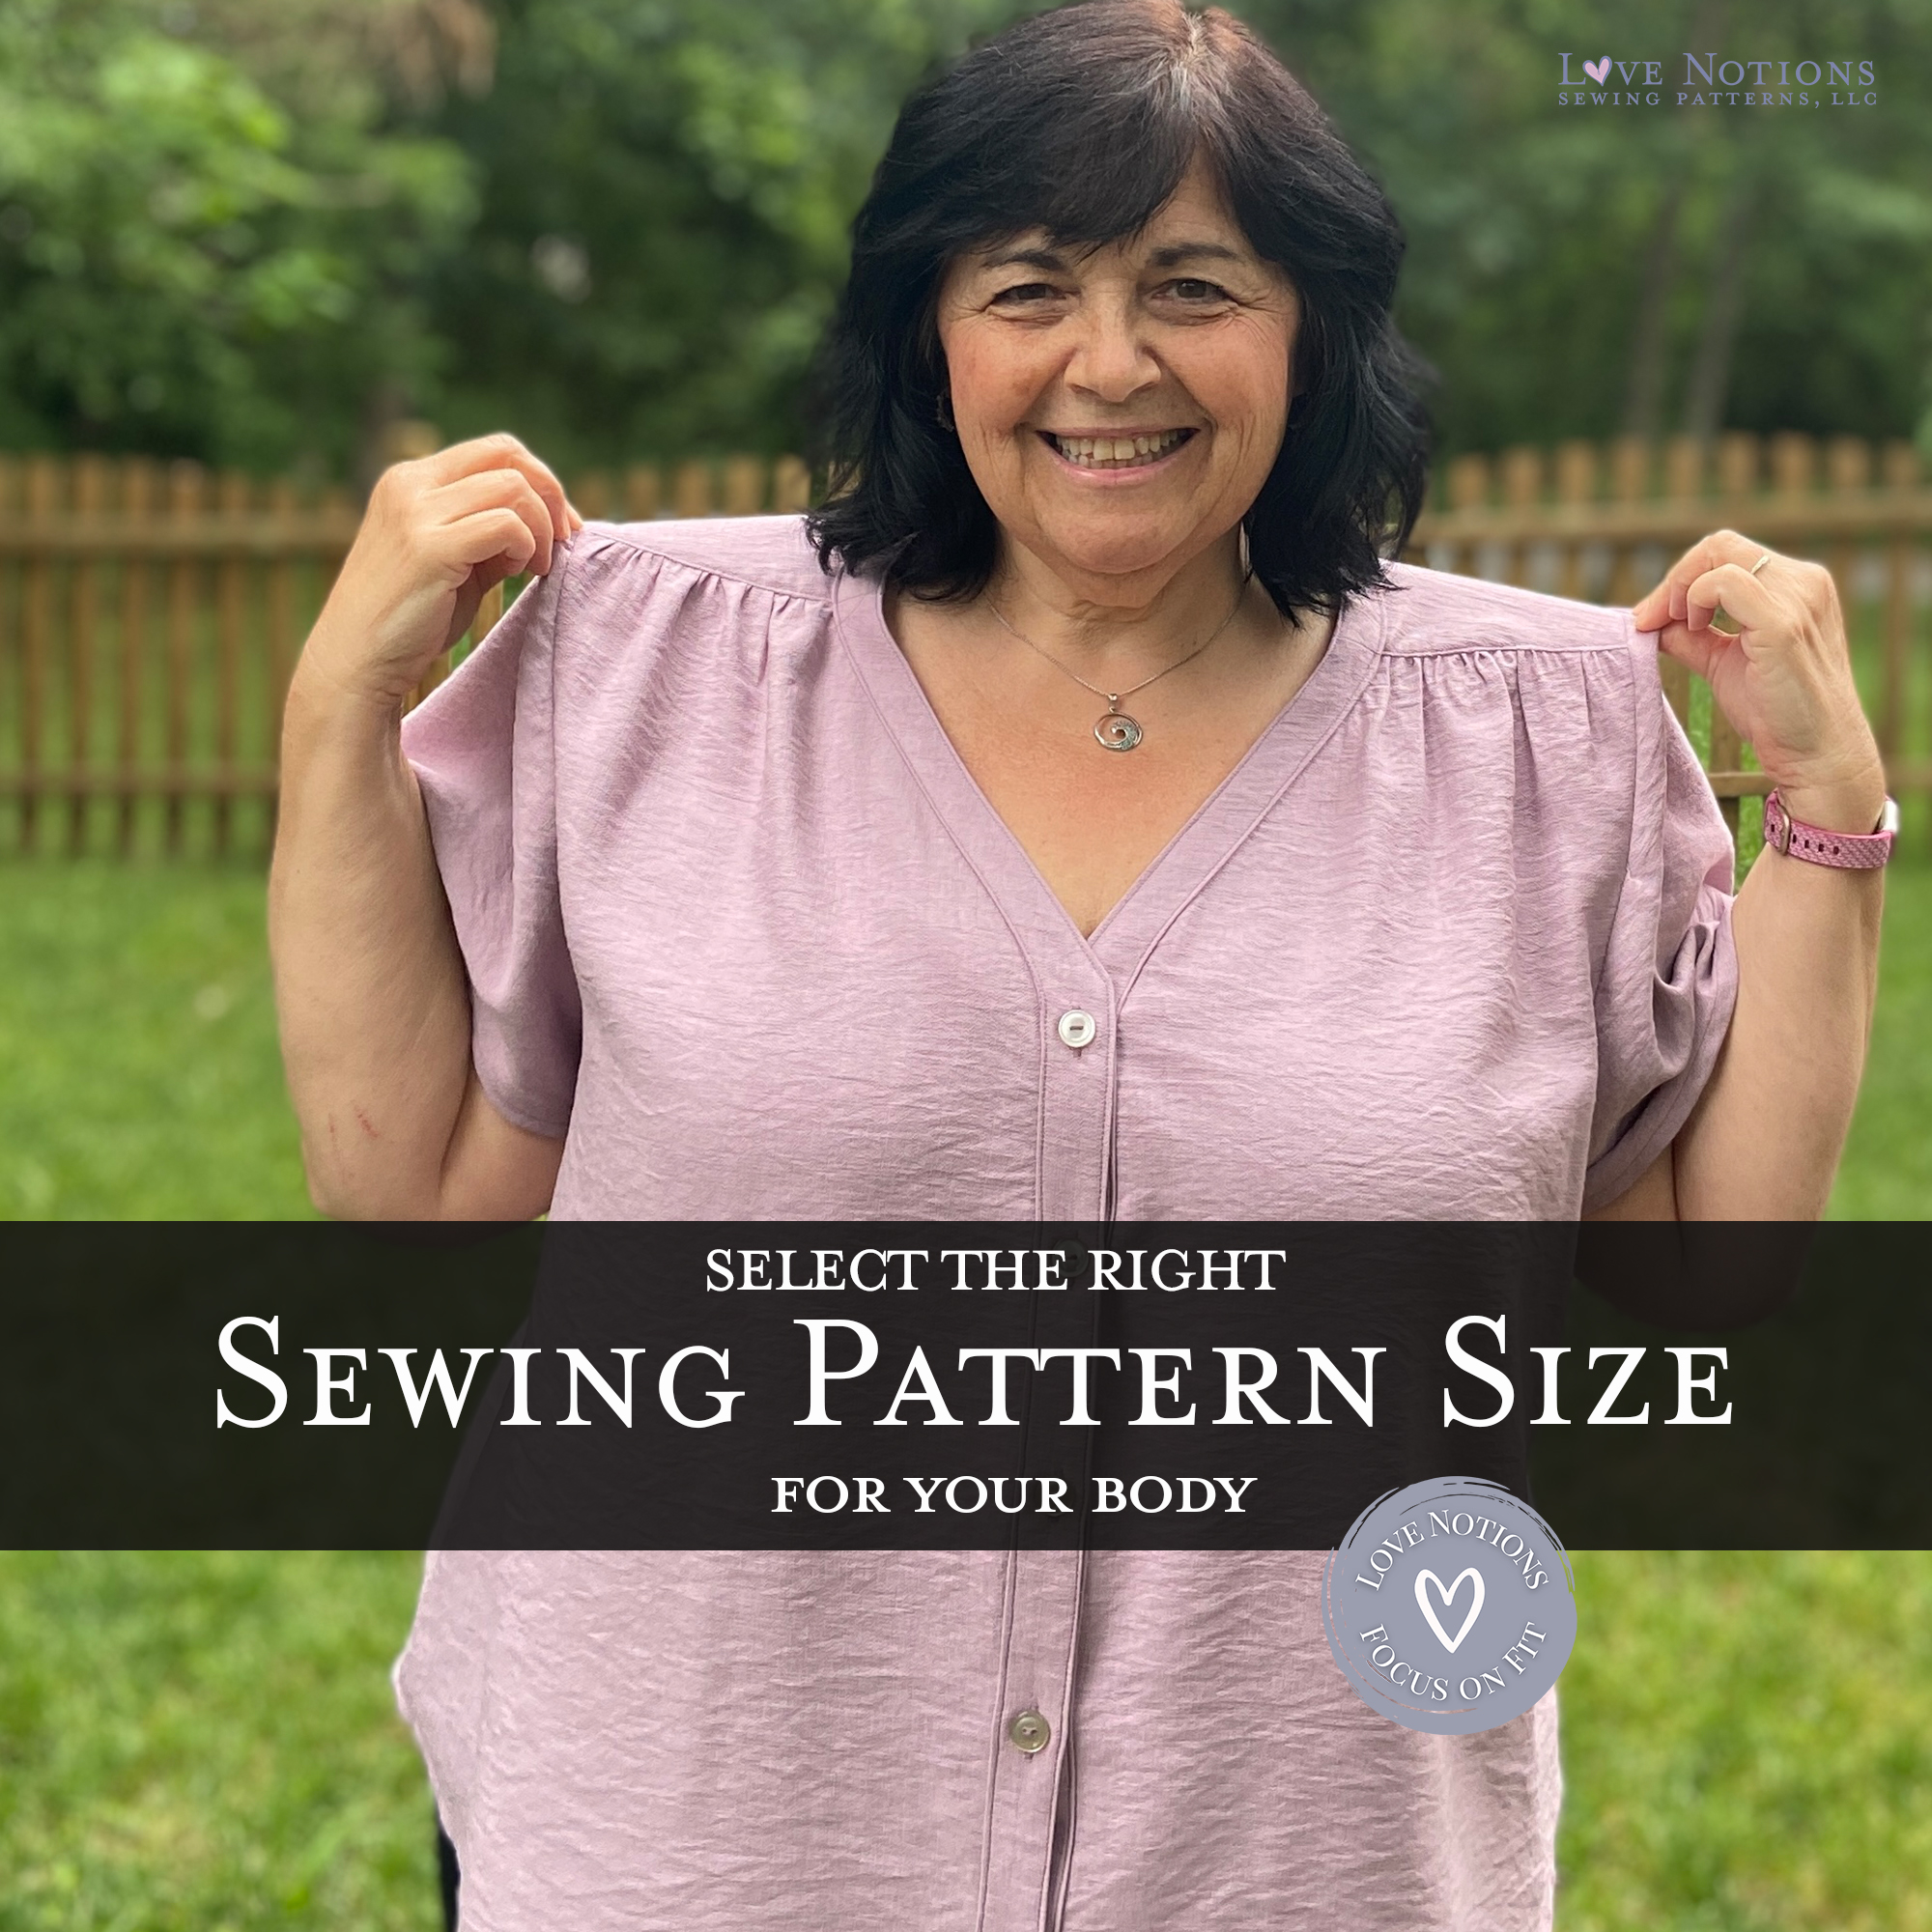 How to Fix a Gaping Arm Scye with Presto Tunic - Love Notions Sewing  Patterns